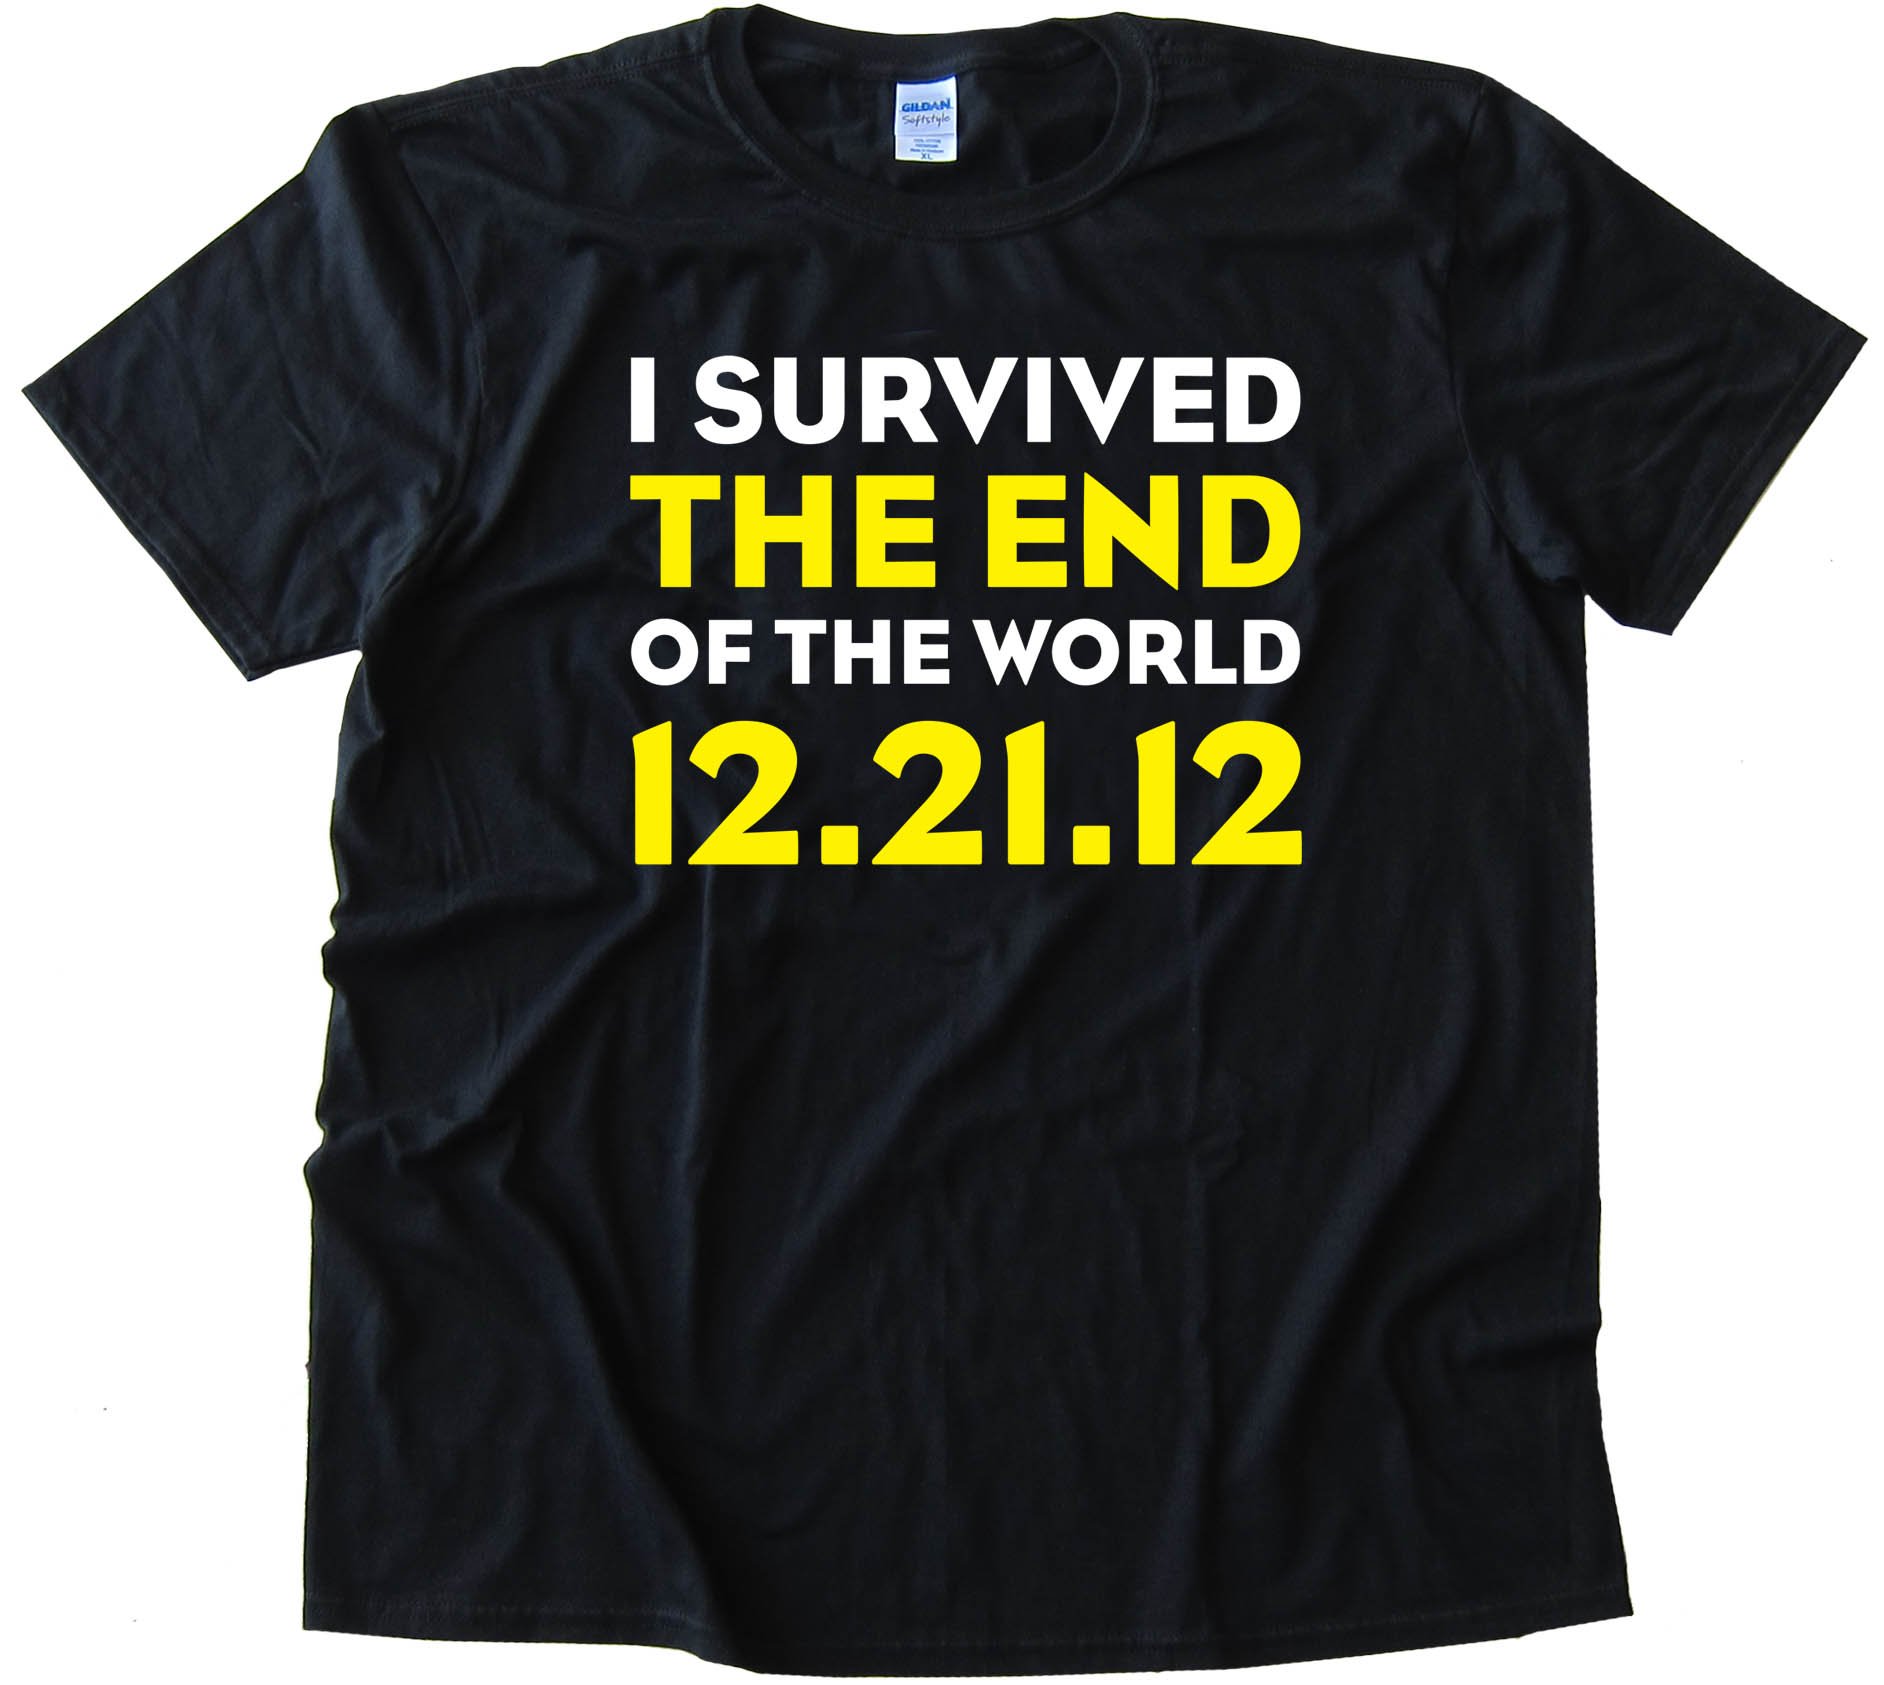 I Survived The End Of The World 12.21.12 - Mayan Apocalypse - Tee Shirt